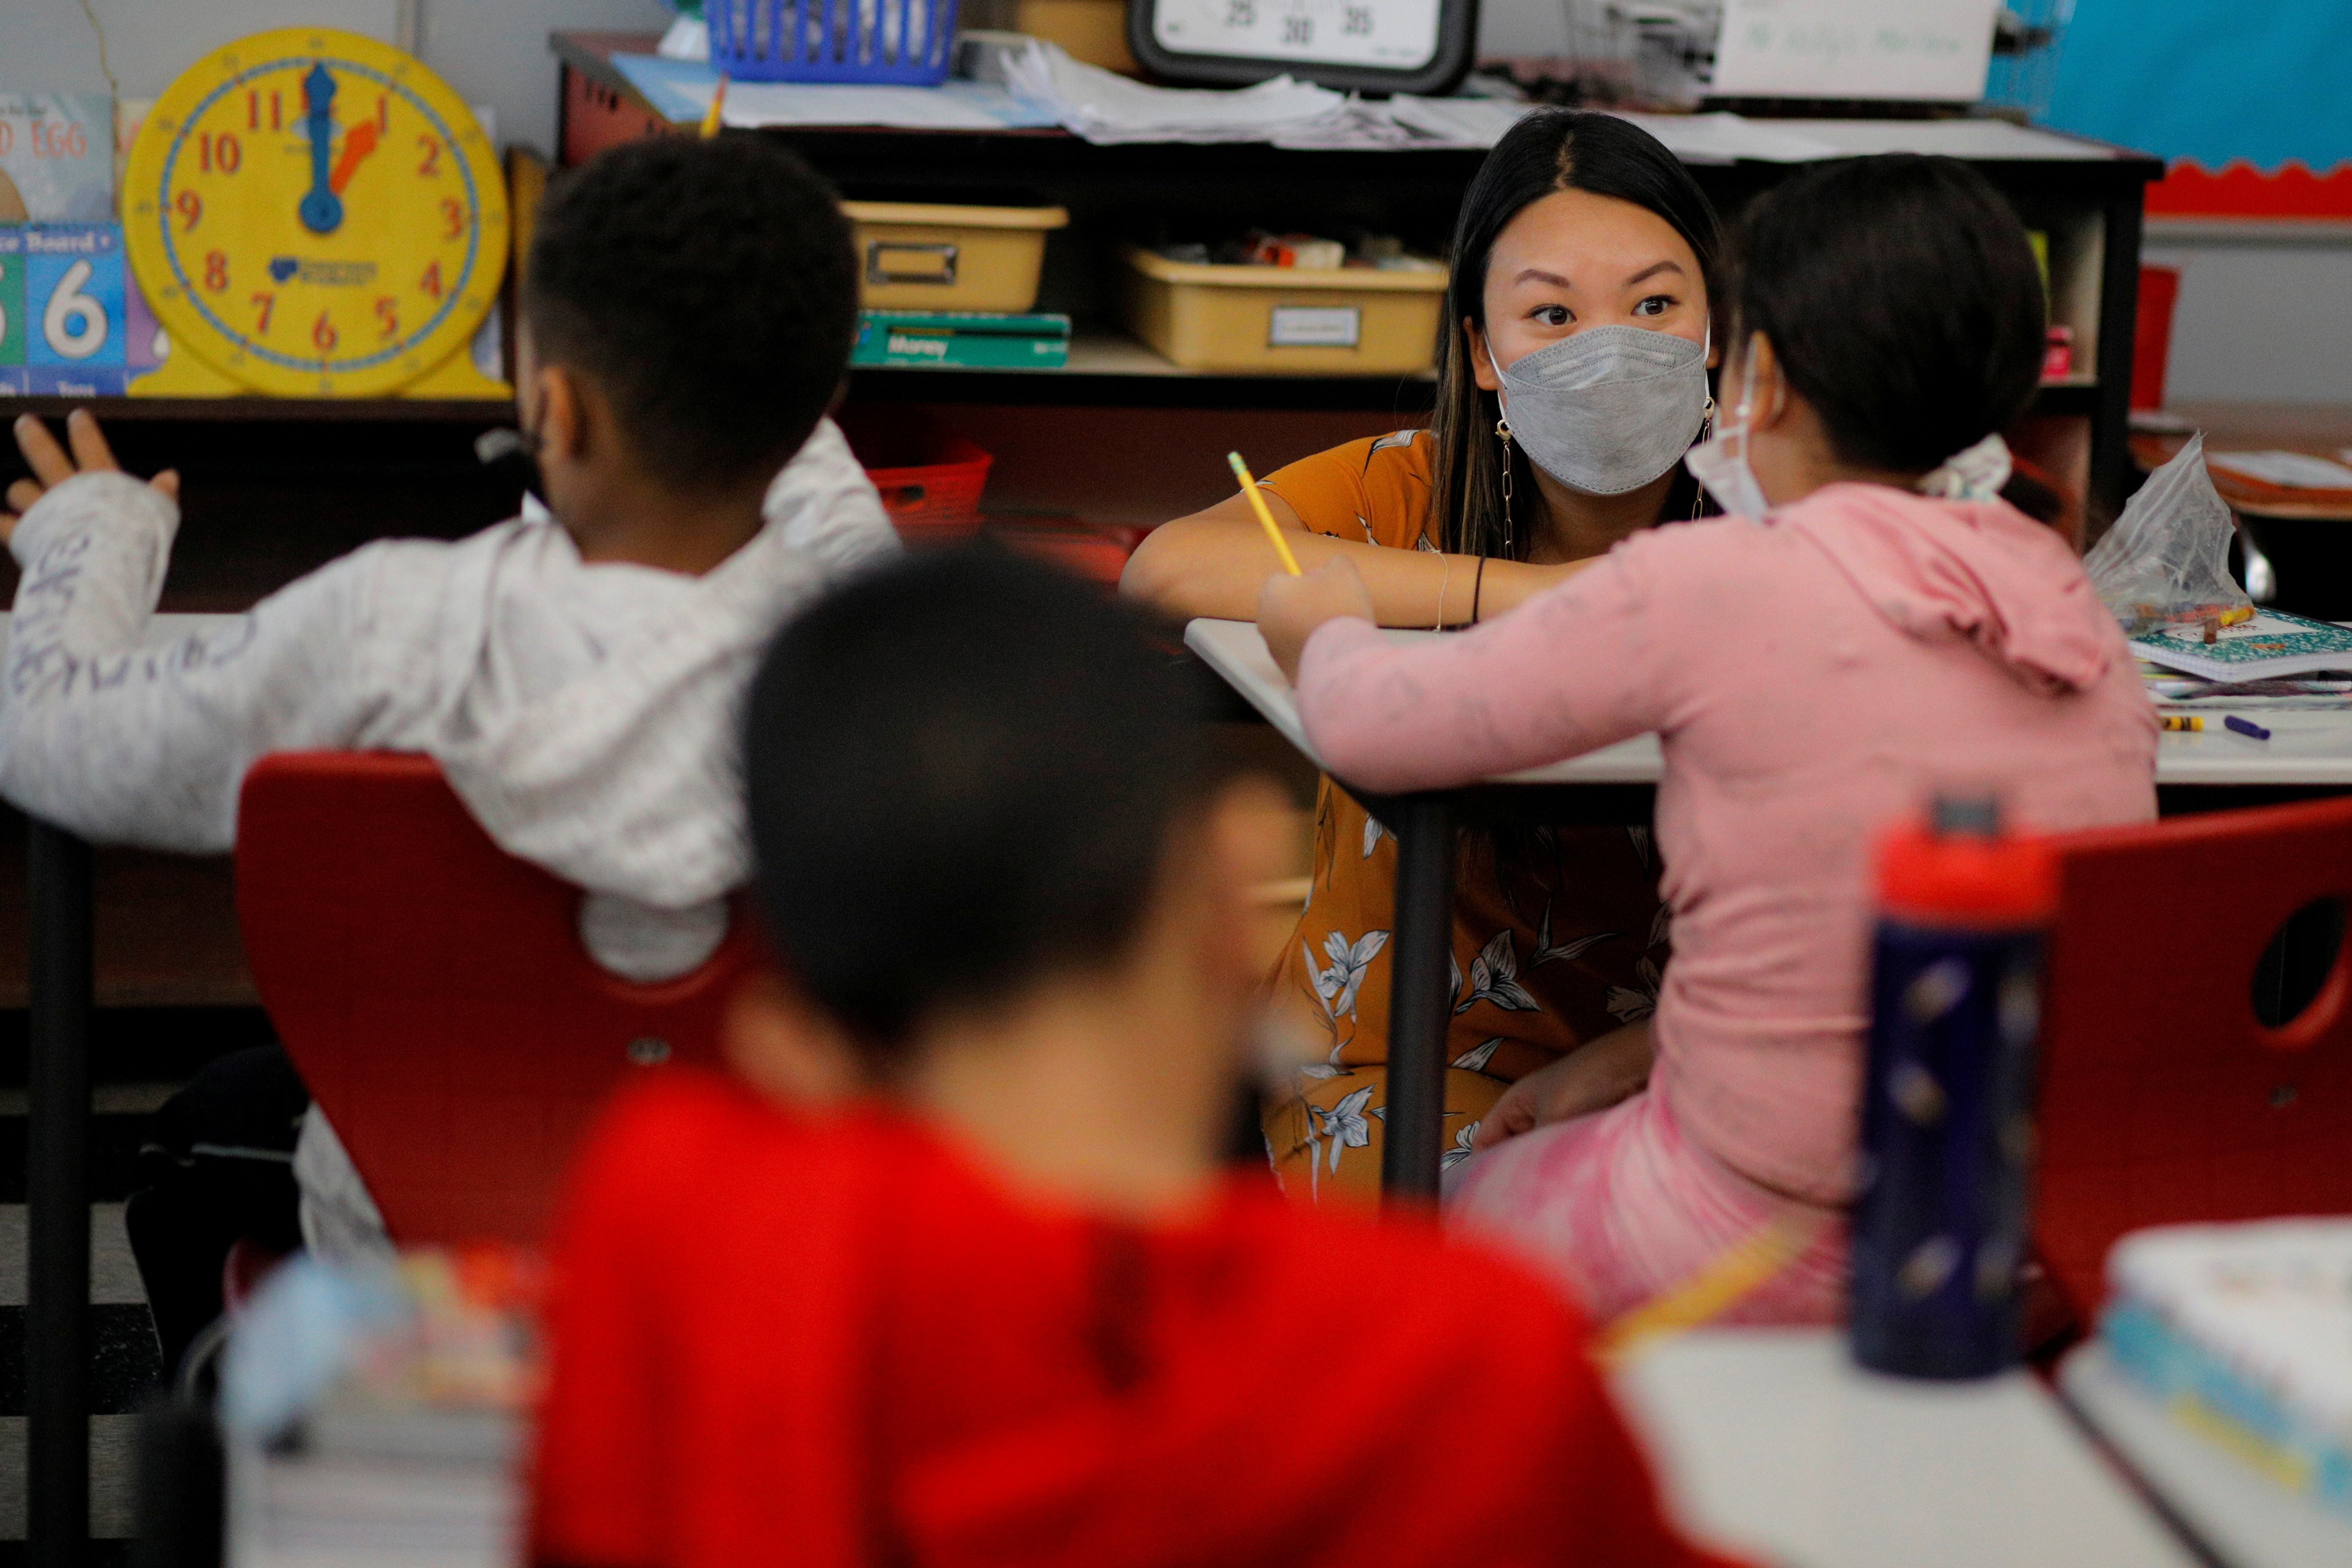 Classes are held with masks being required to be worn at the Sokolowski School in Chelsea